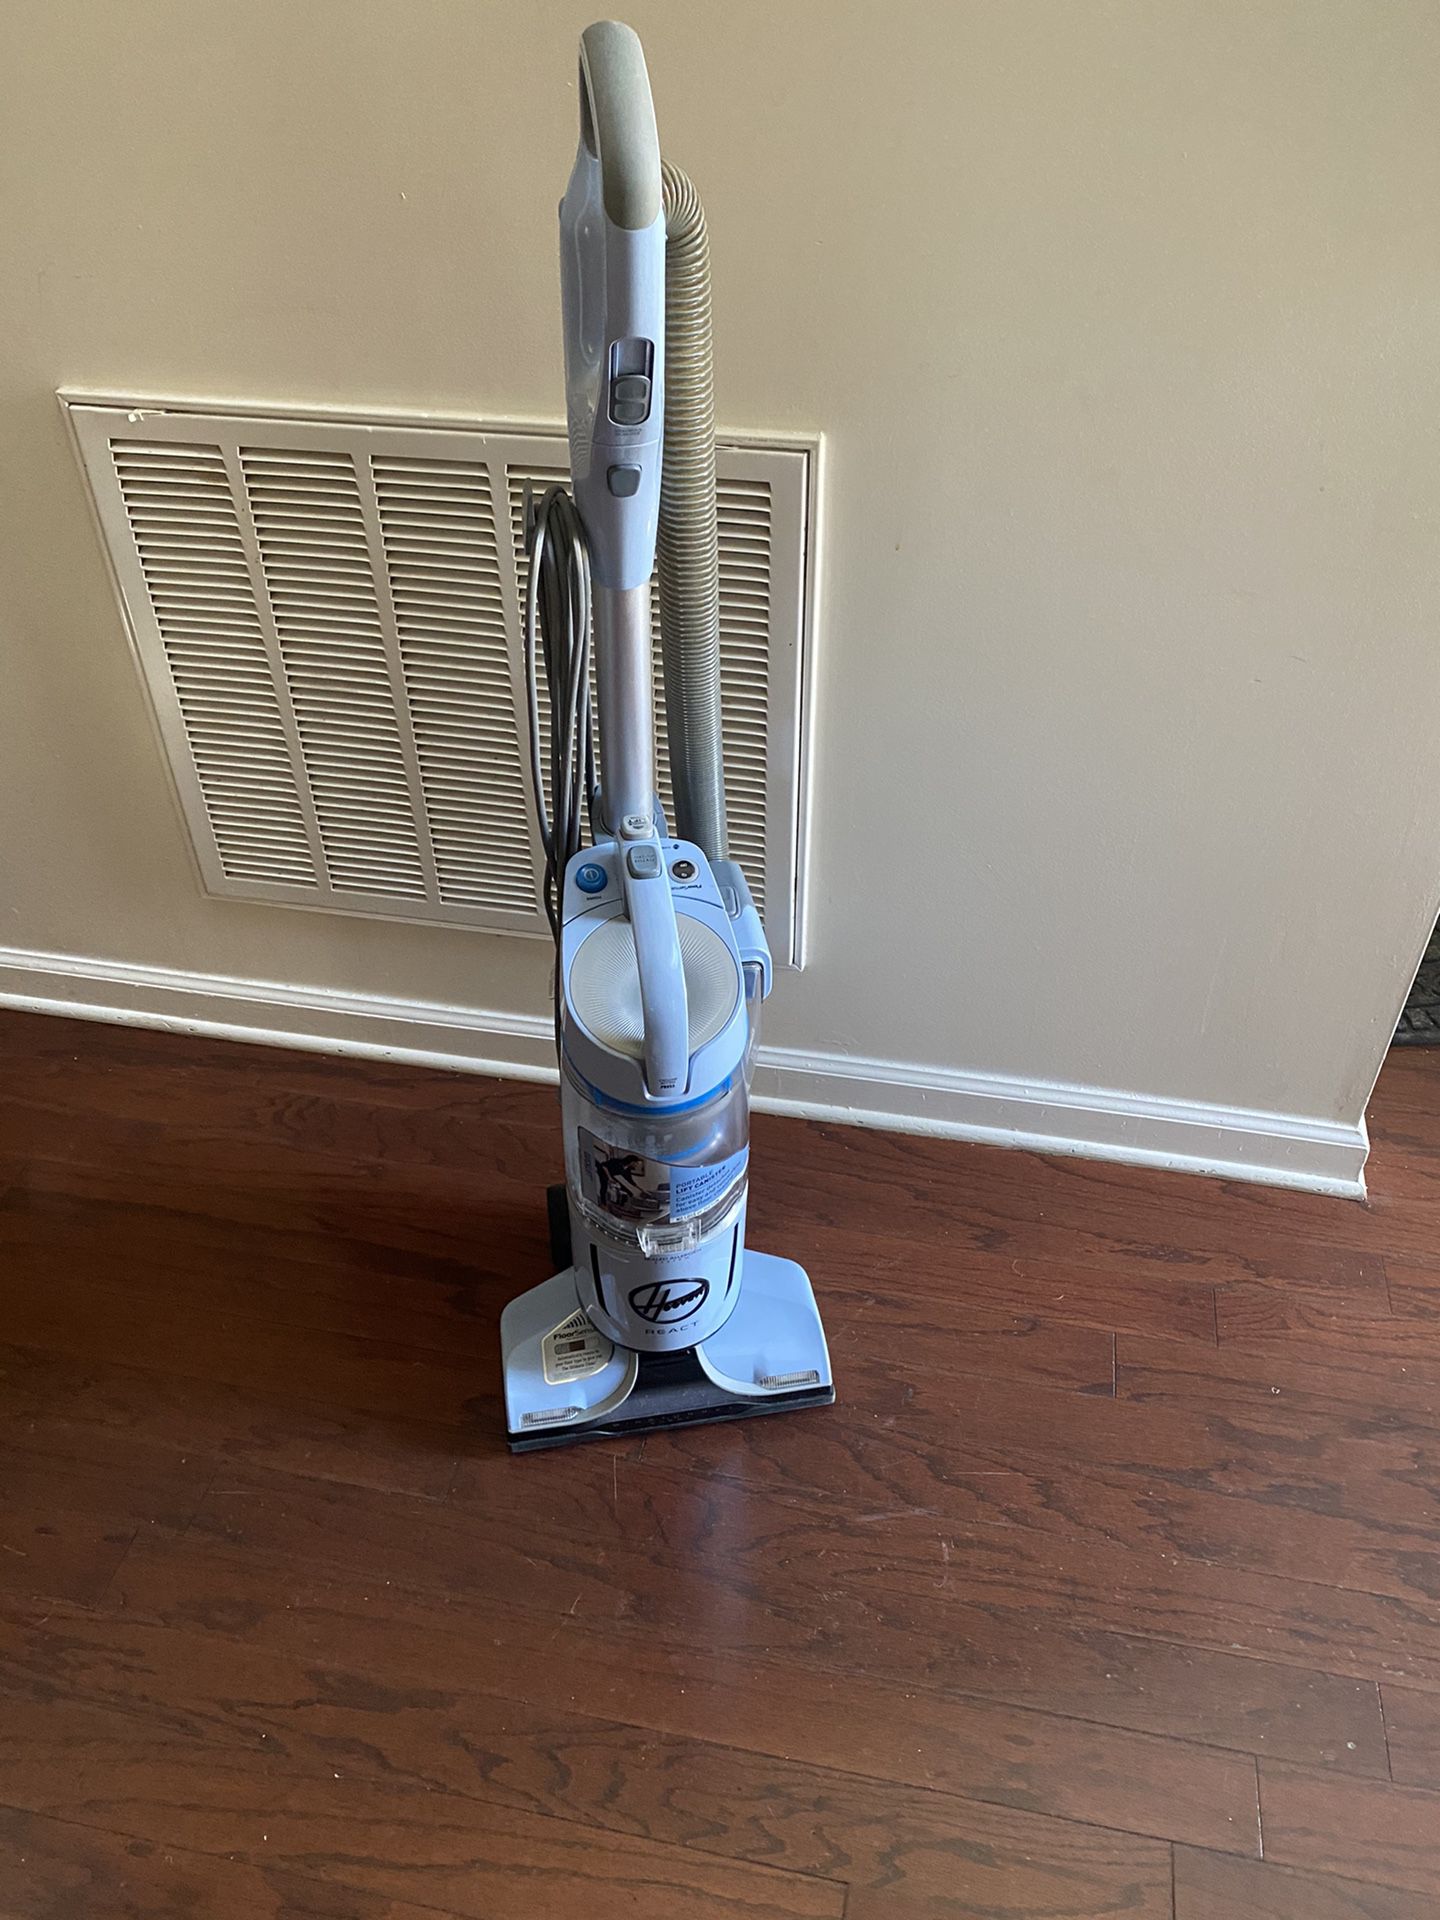 Hoover React wind tunnel Vacuum Cleaner